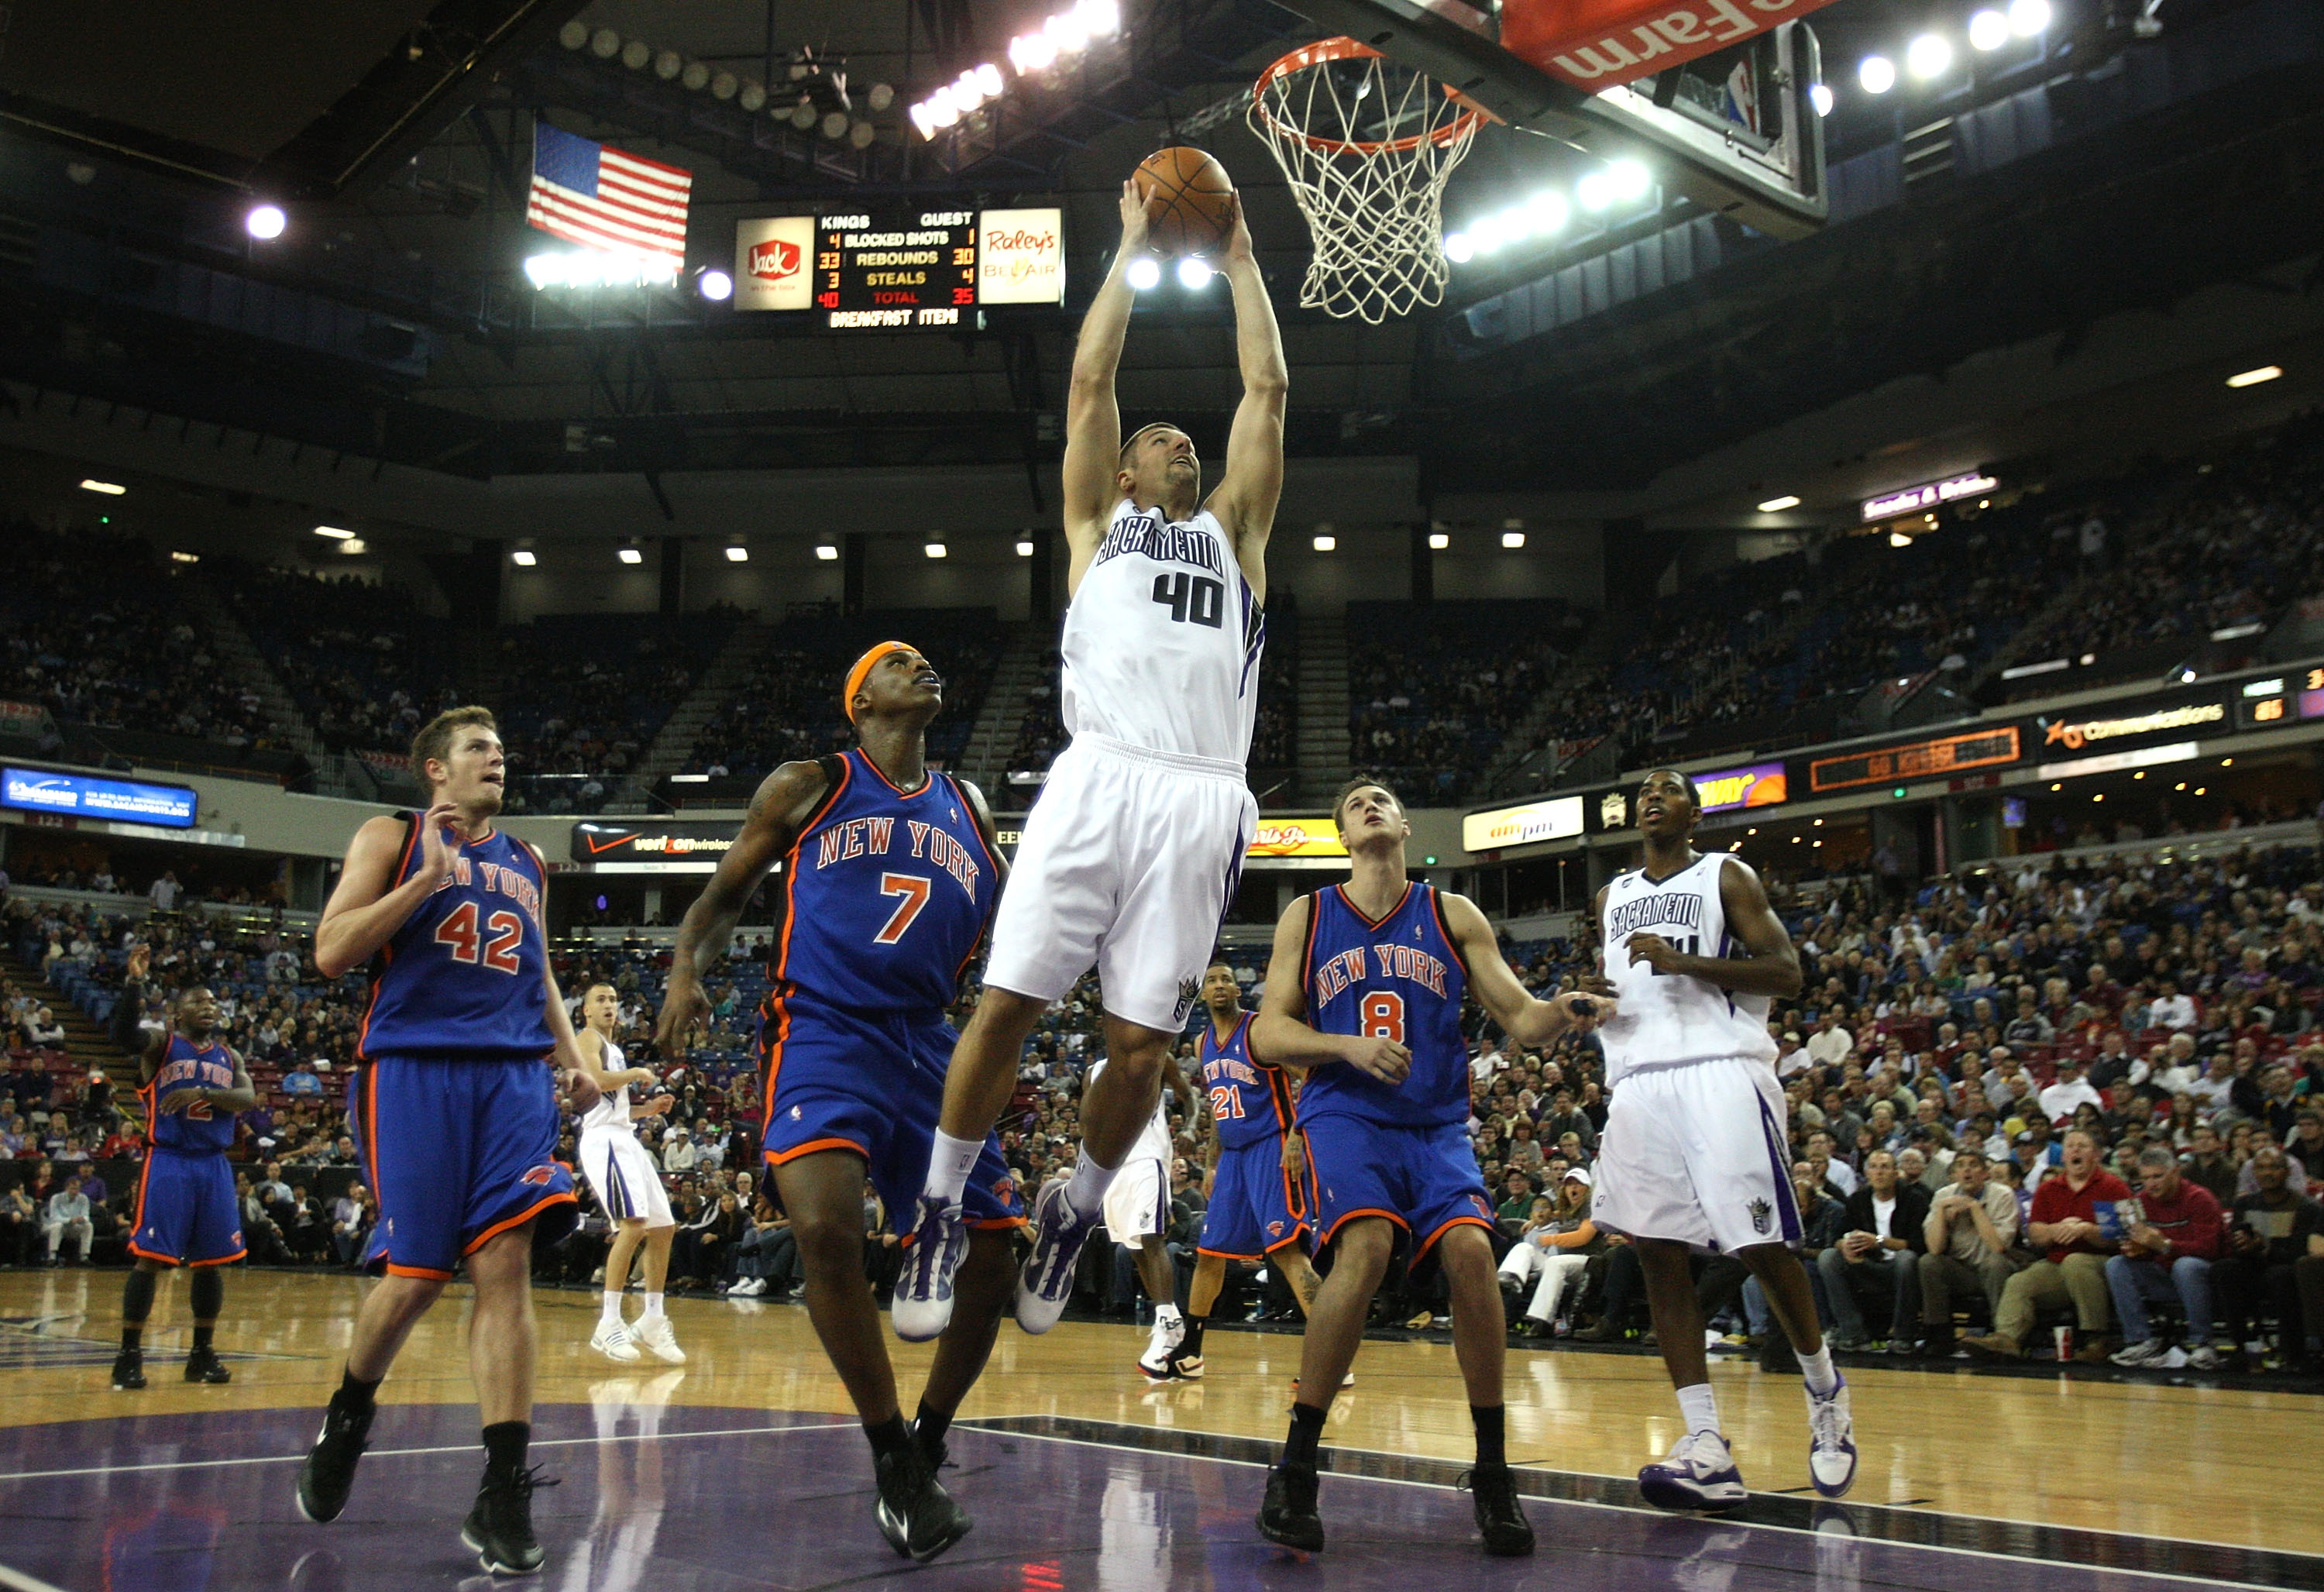 SACRAMENTO, CA - NOVEMBER 25: Jon Brockman #40 of the Sacramento Kings shoots against the New York Knicks on November 25, 2009 at ARCO Arena in Sacramento, California. NOTE TO USER: User expressly acknowledges and agrees that, by downloading and/or using